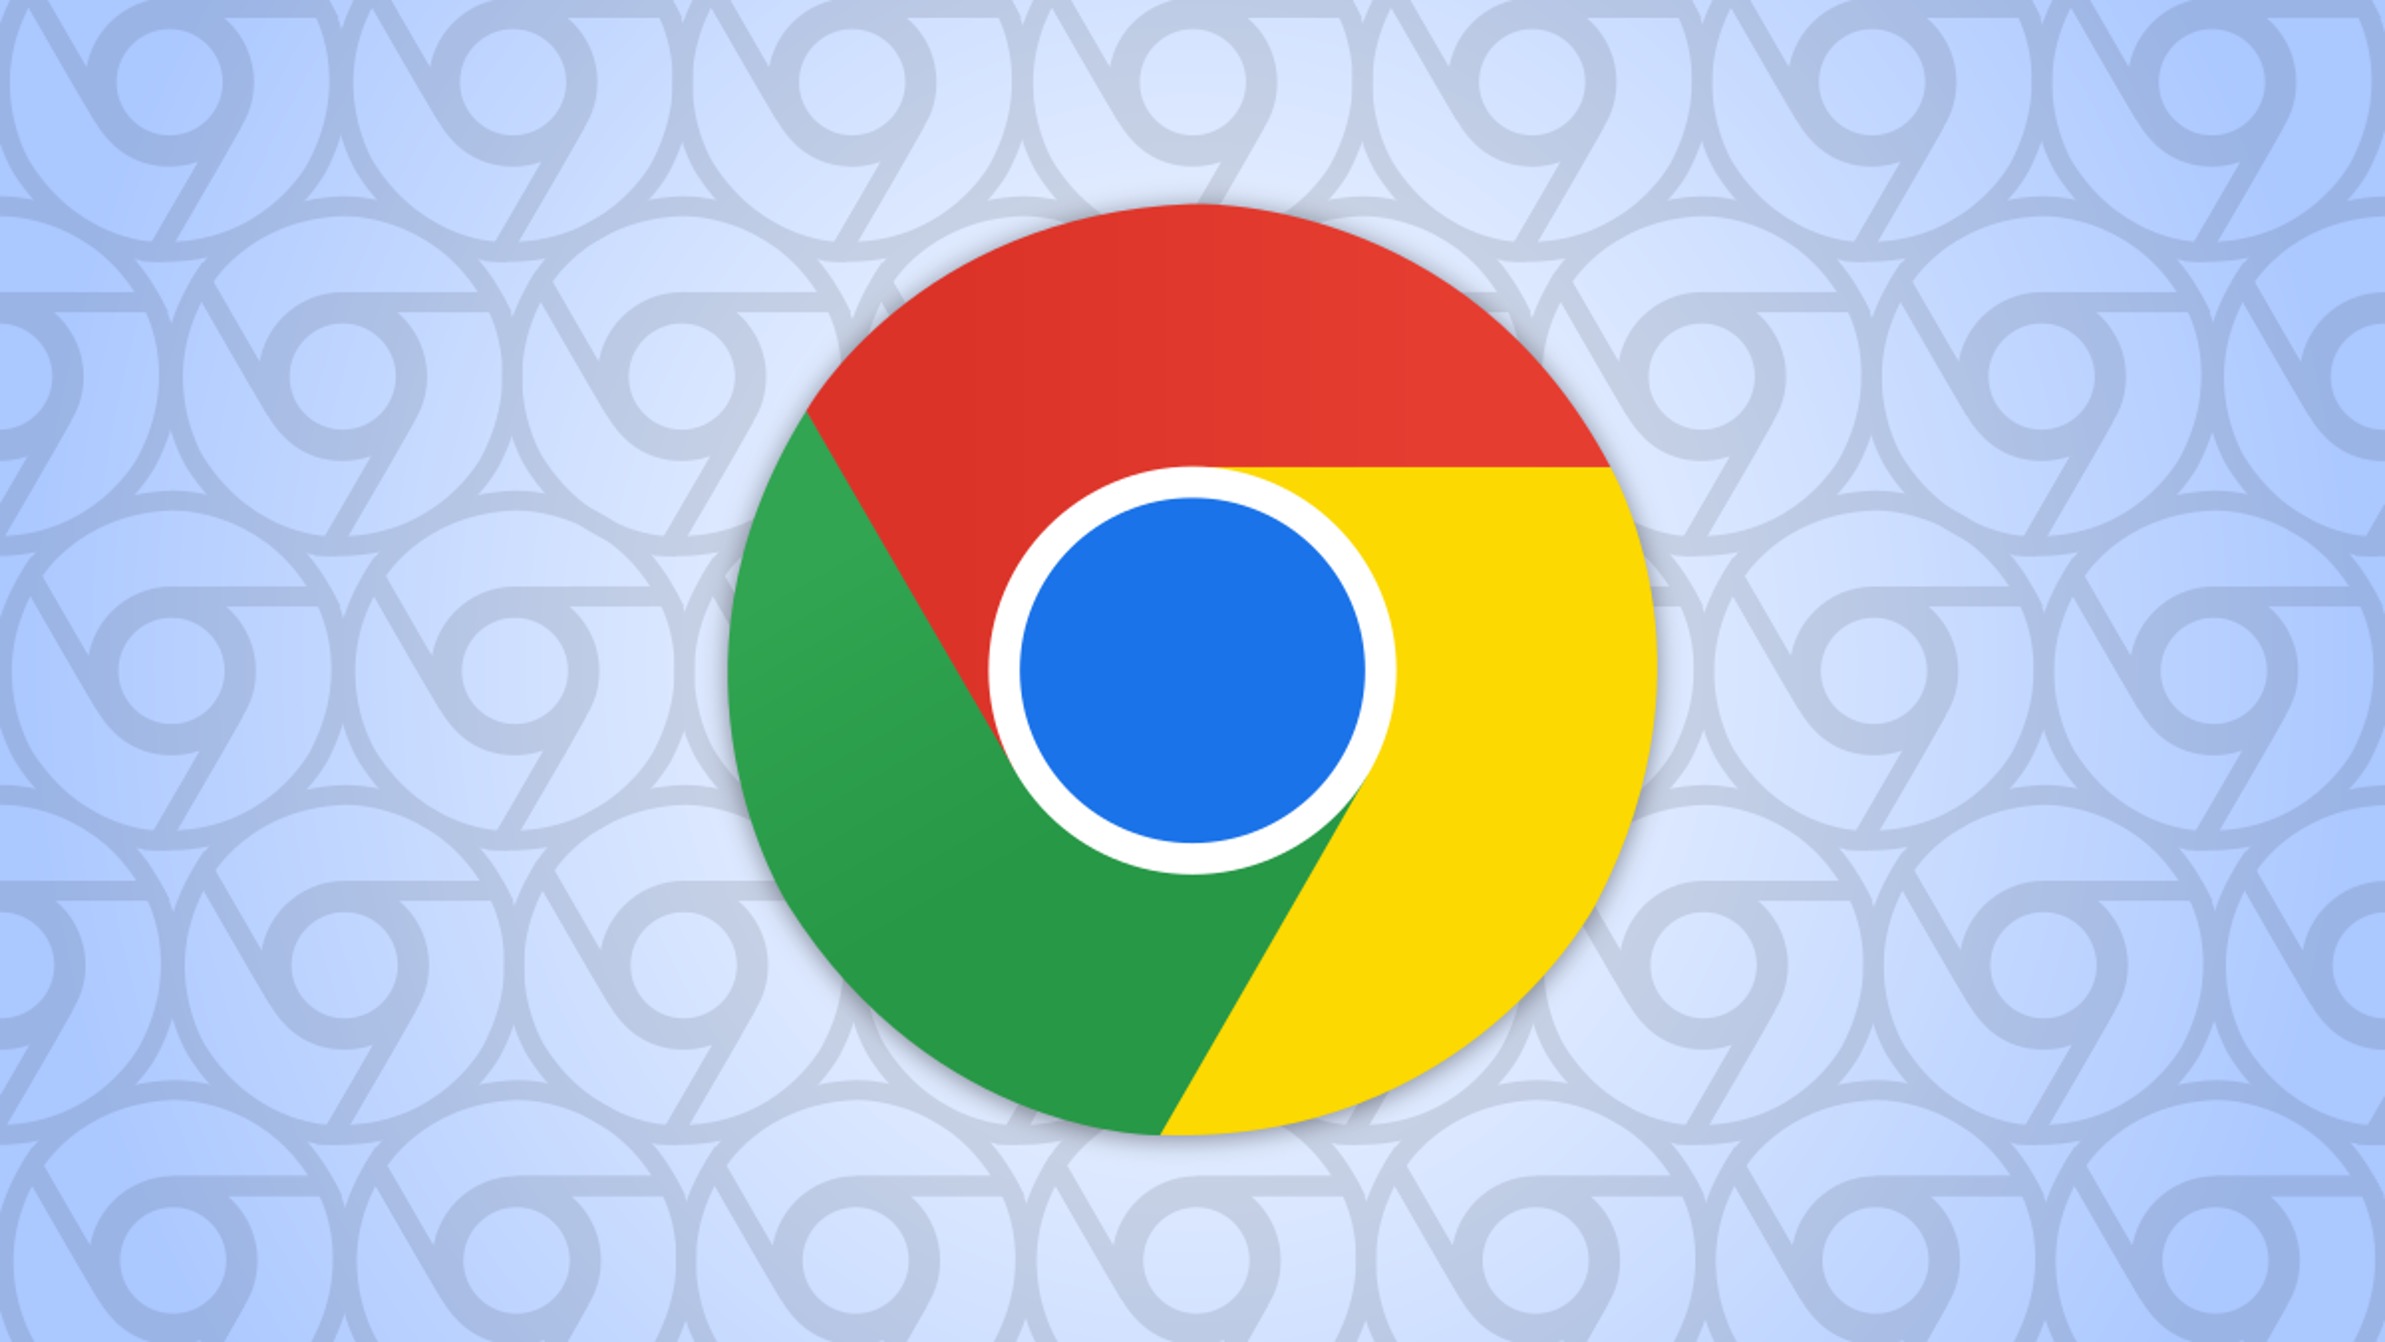 Where Are Bookmarks Stored On Google Chrome?